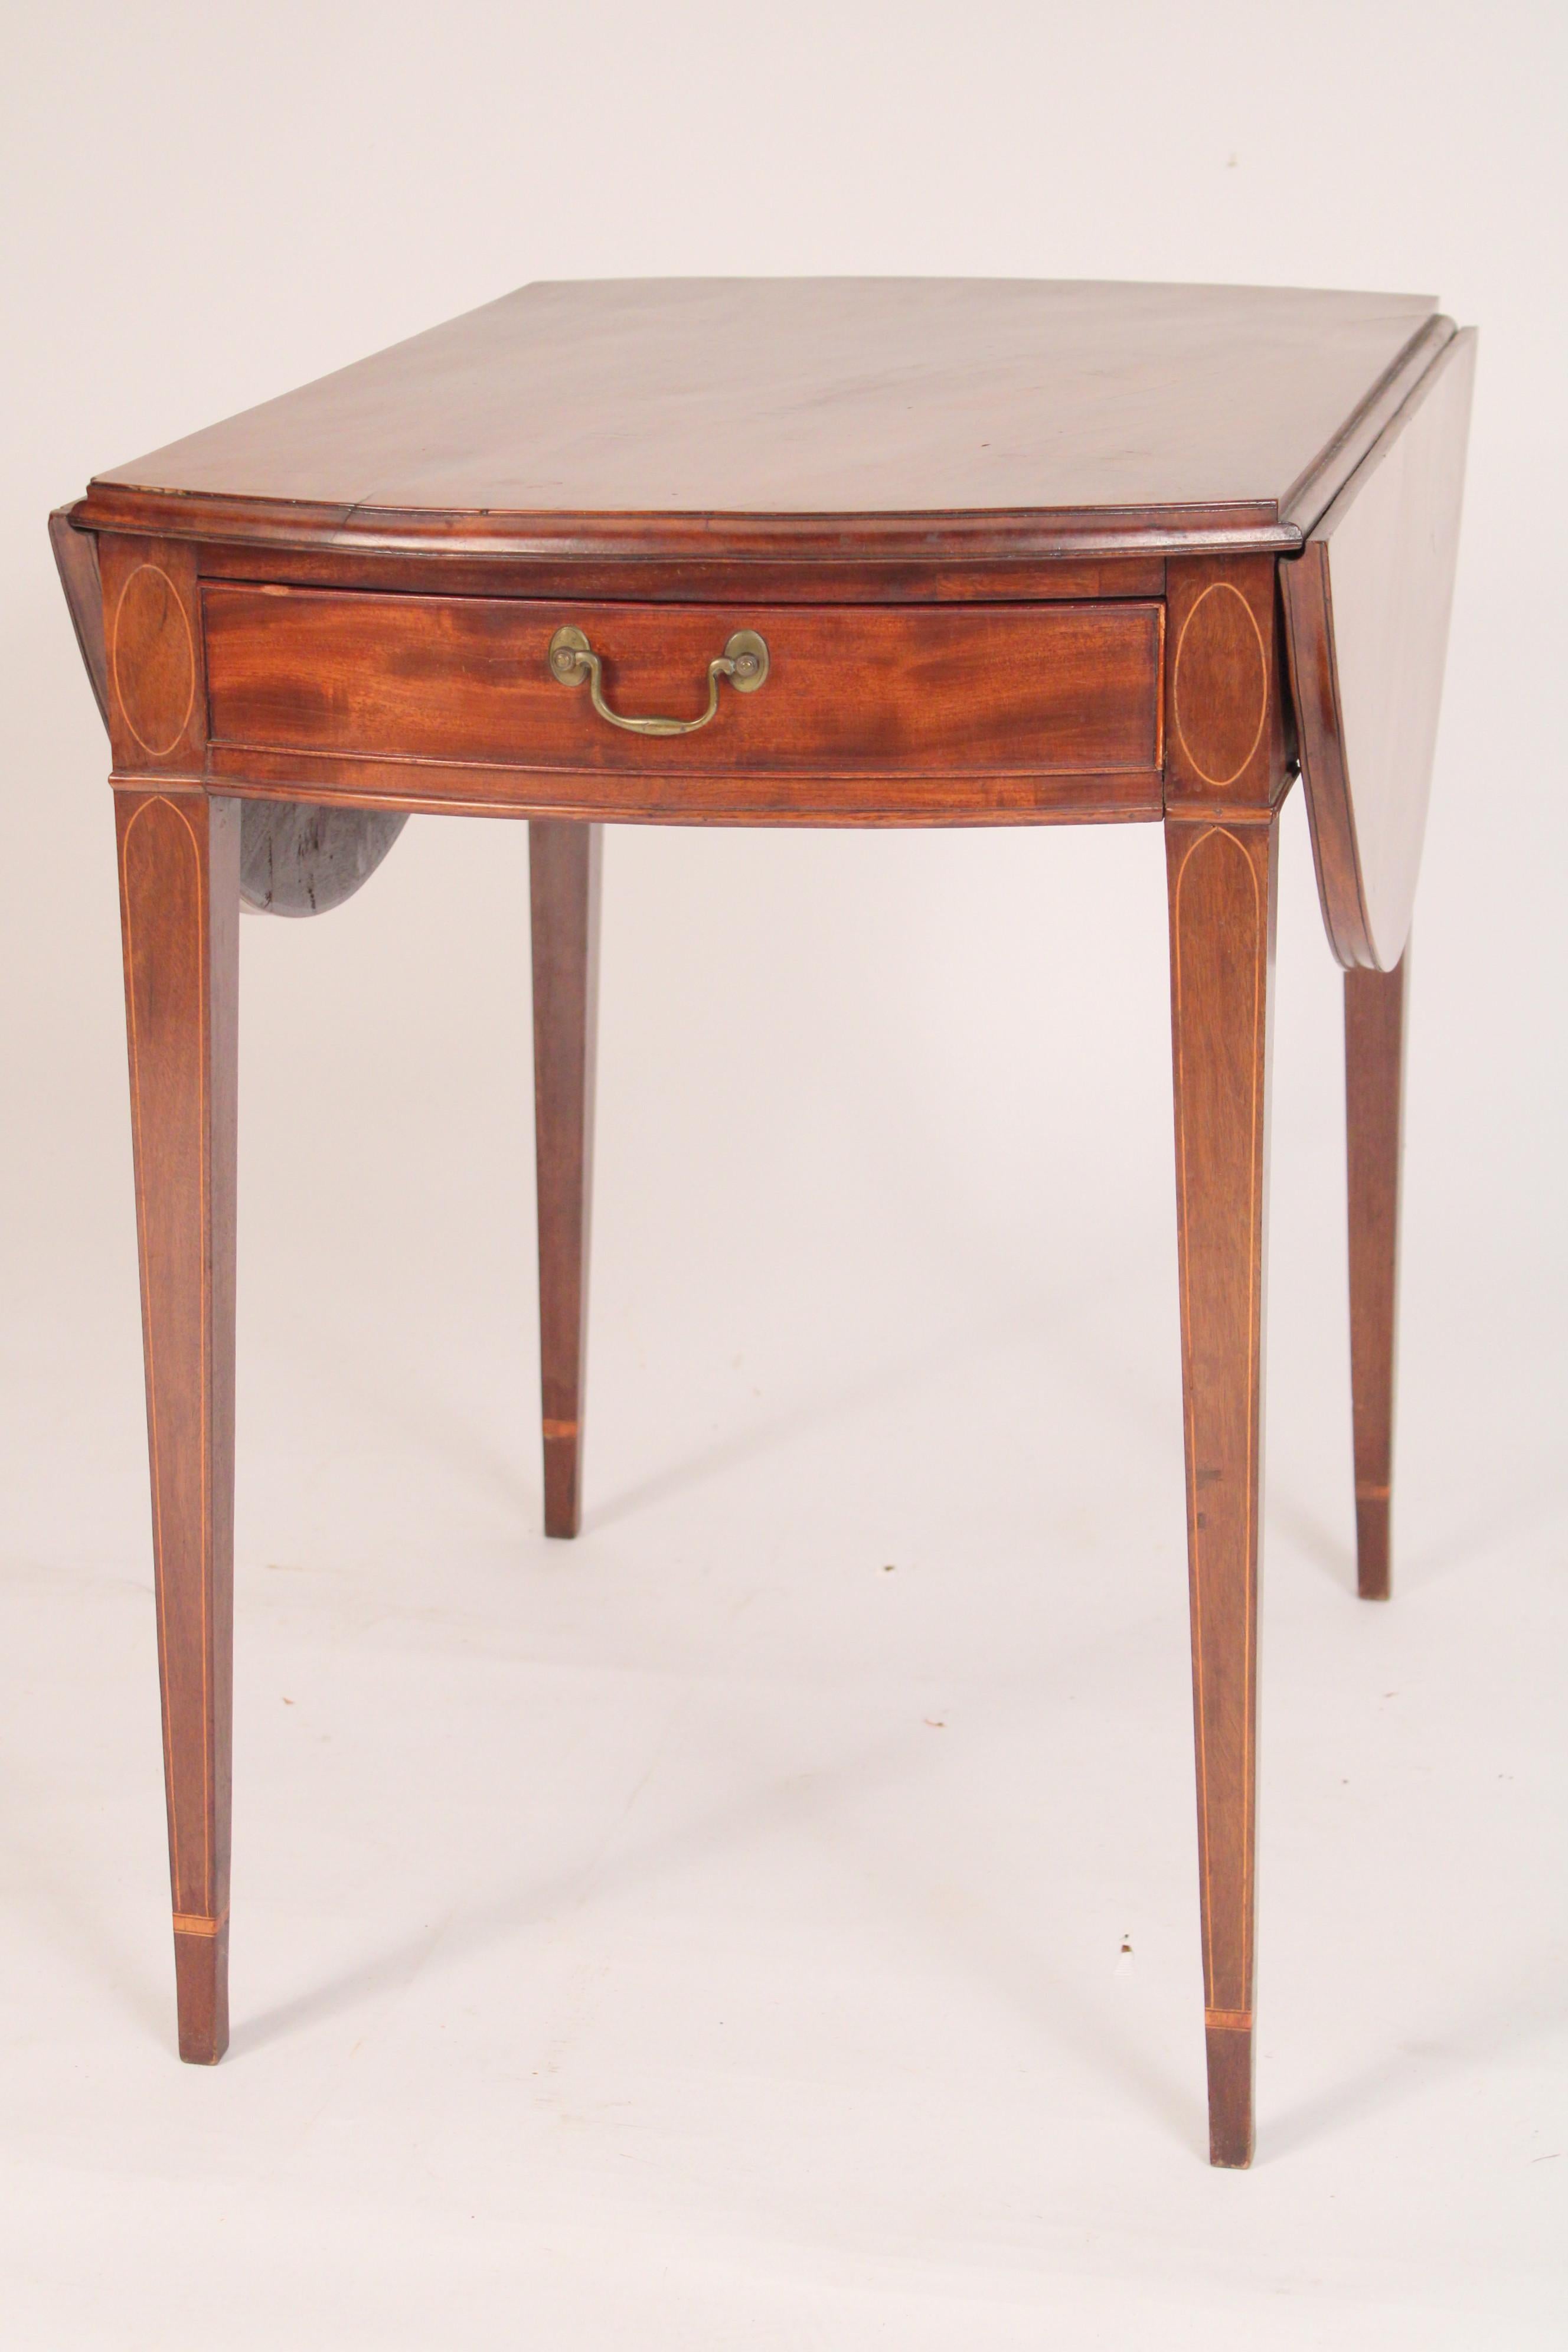 English Antique George III Style Pembroke Table For Sale